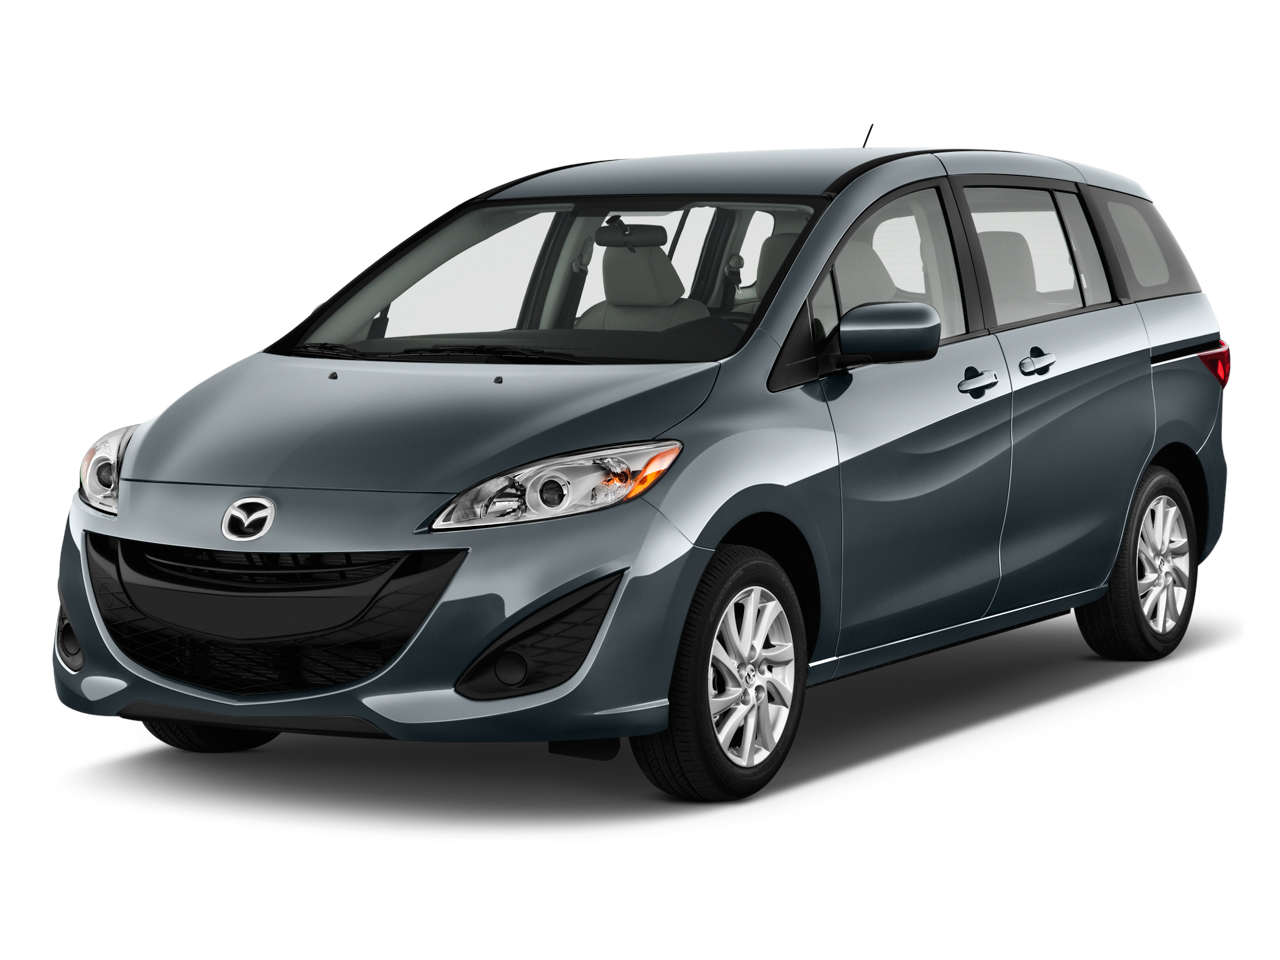 2012 Mazda MAZDA5 Review, Ratings, Specs, Prices, and Photos - The Car ...